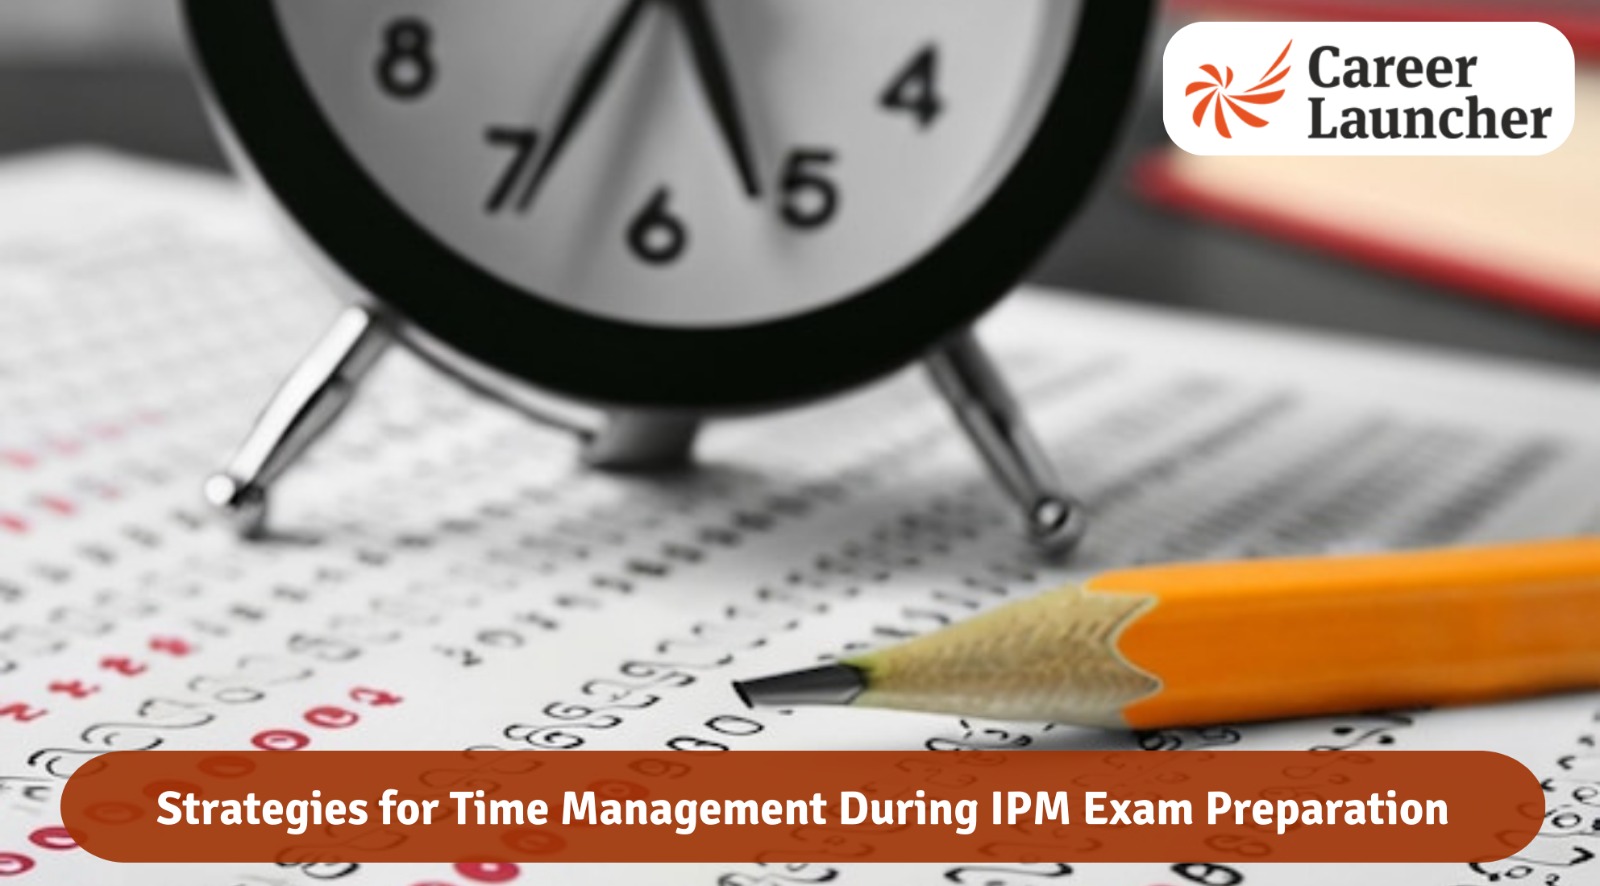 Strategies for Time Management During IPM Exam Preparation